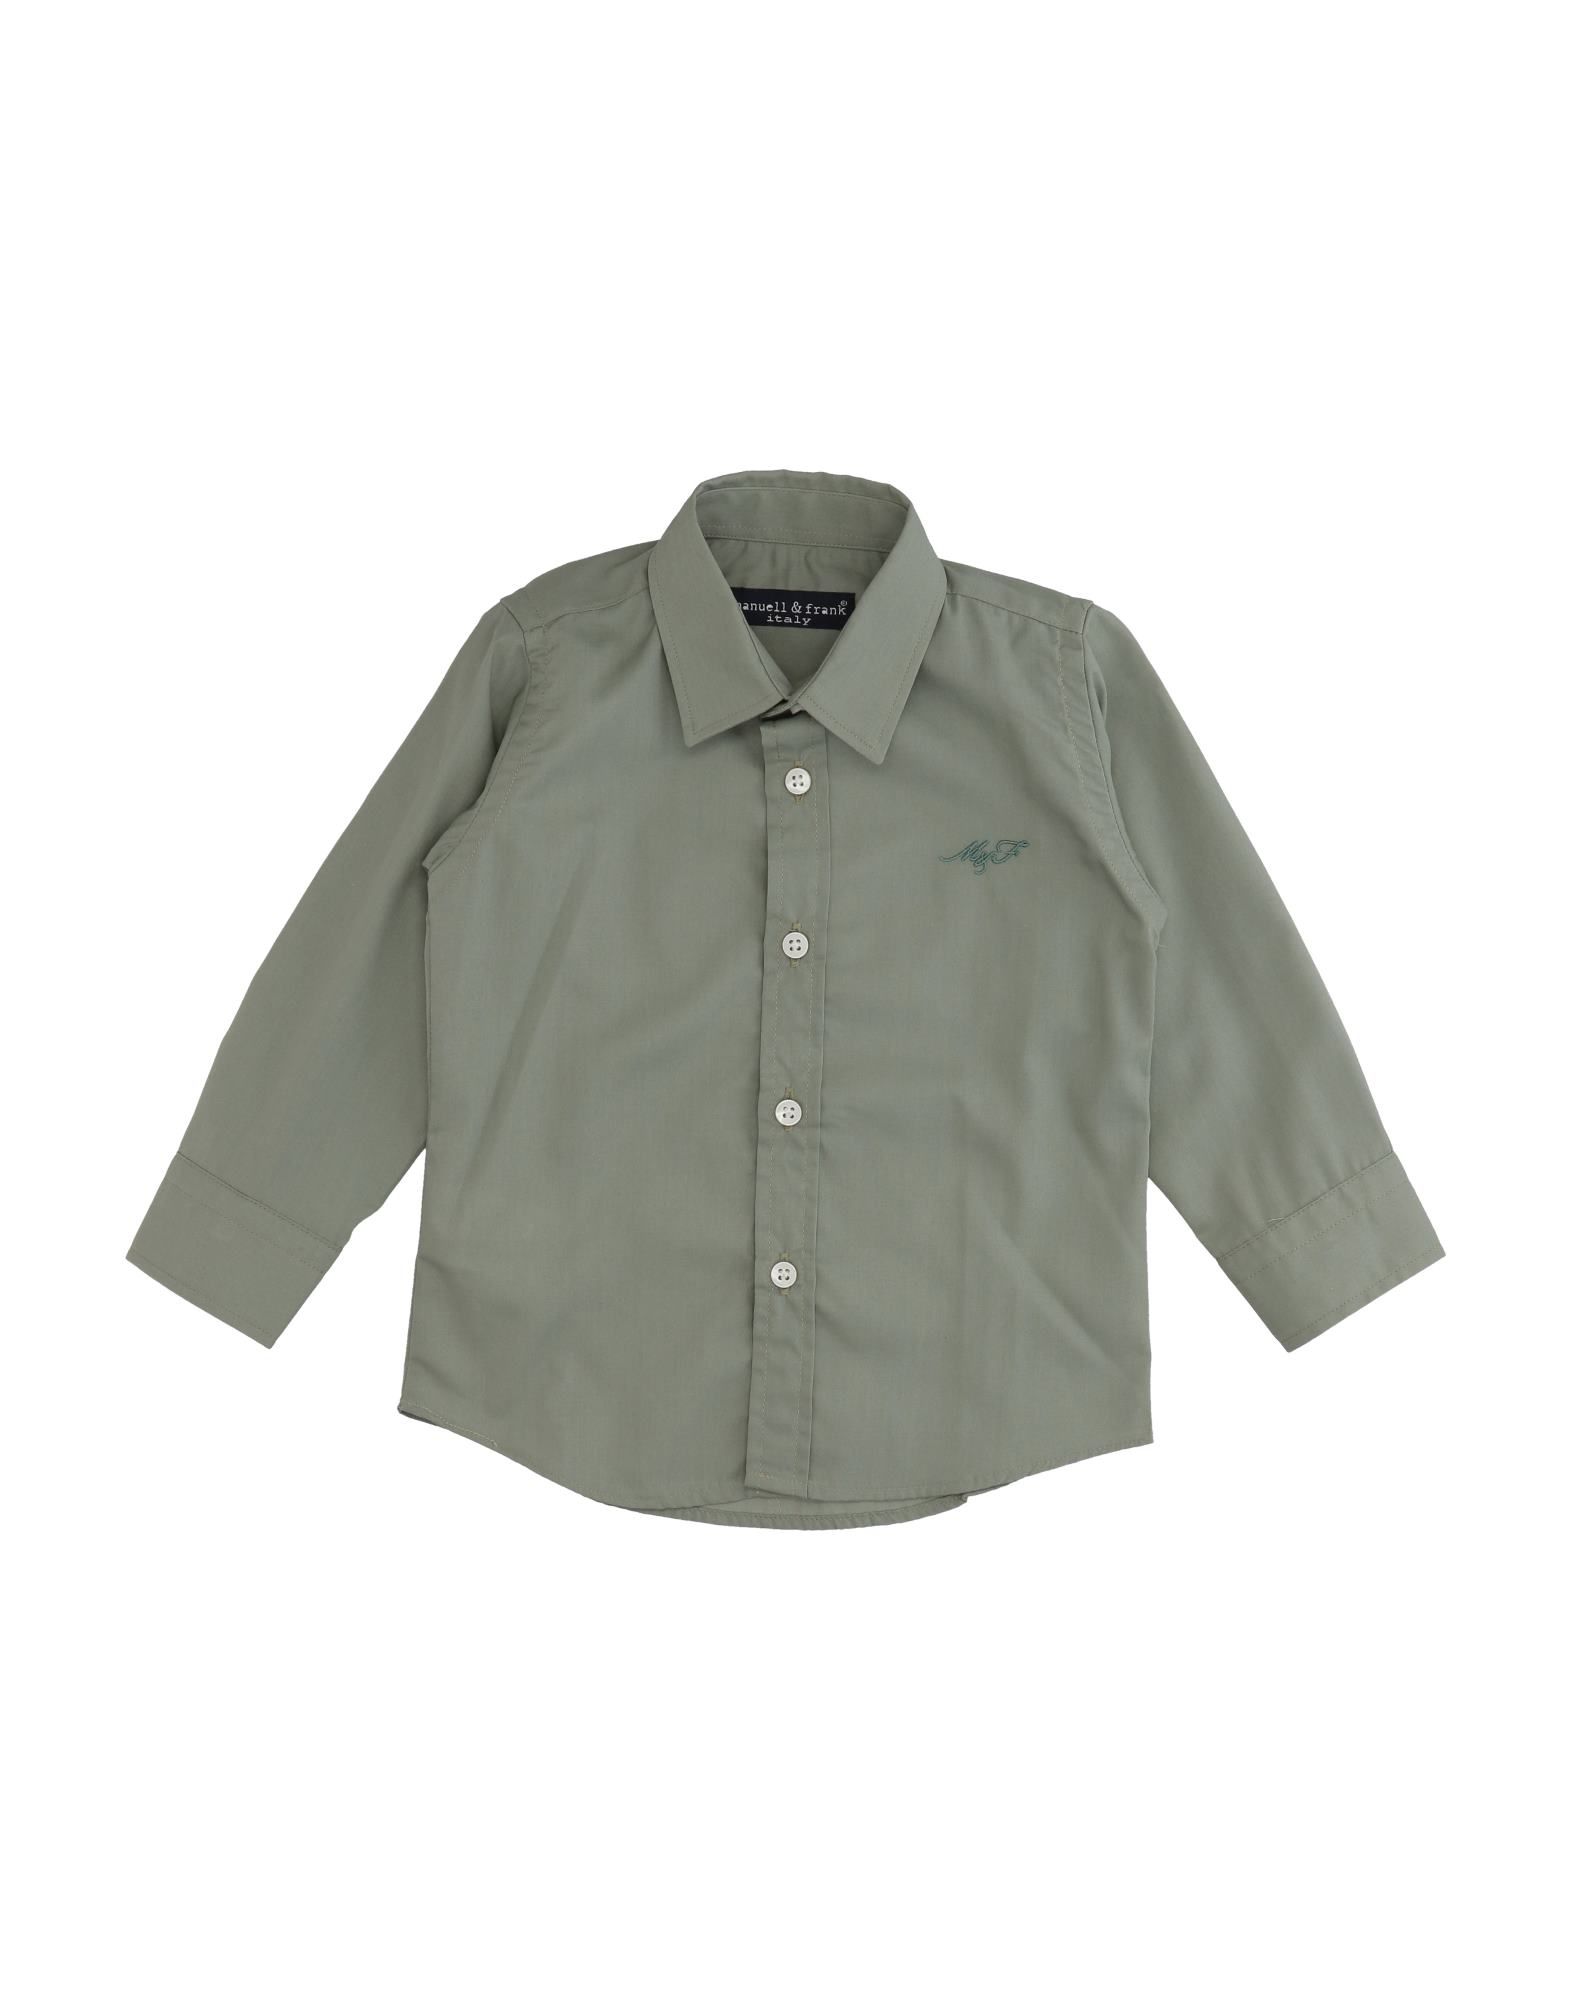 Manuell & Frank Kids' Shirts In Military Green